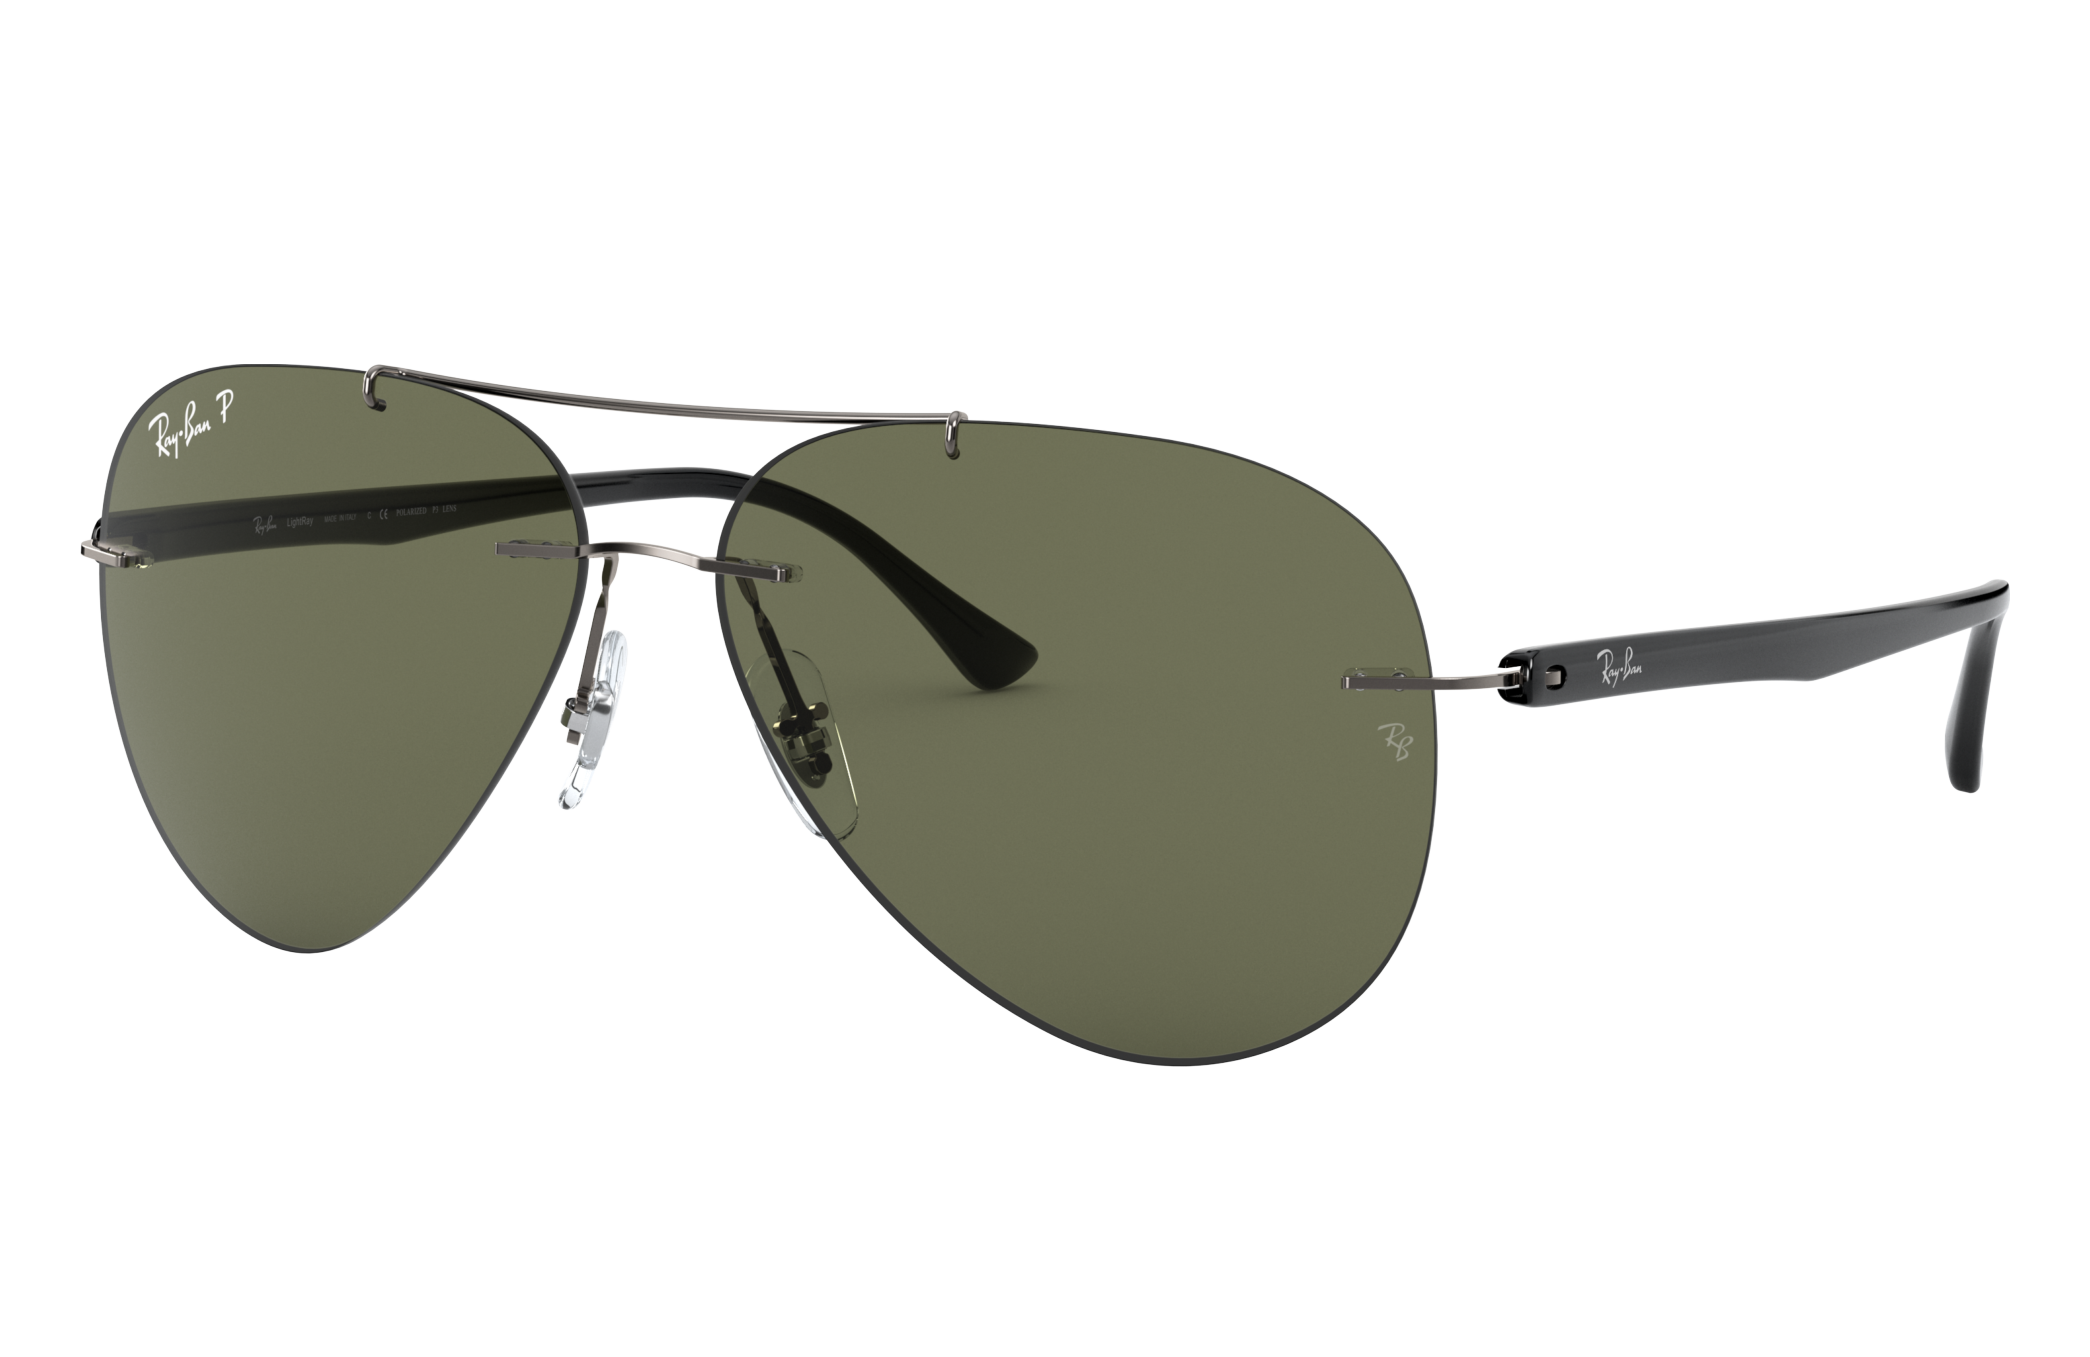 Rb8058 Sunglasses in Gunmetal and Green - RB8058 | Ray-Ban®